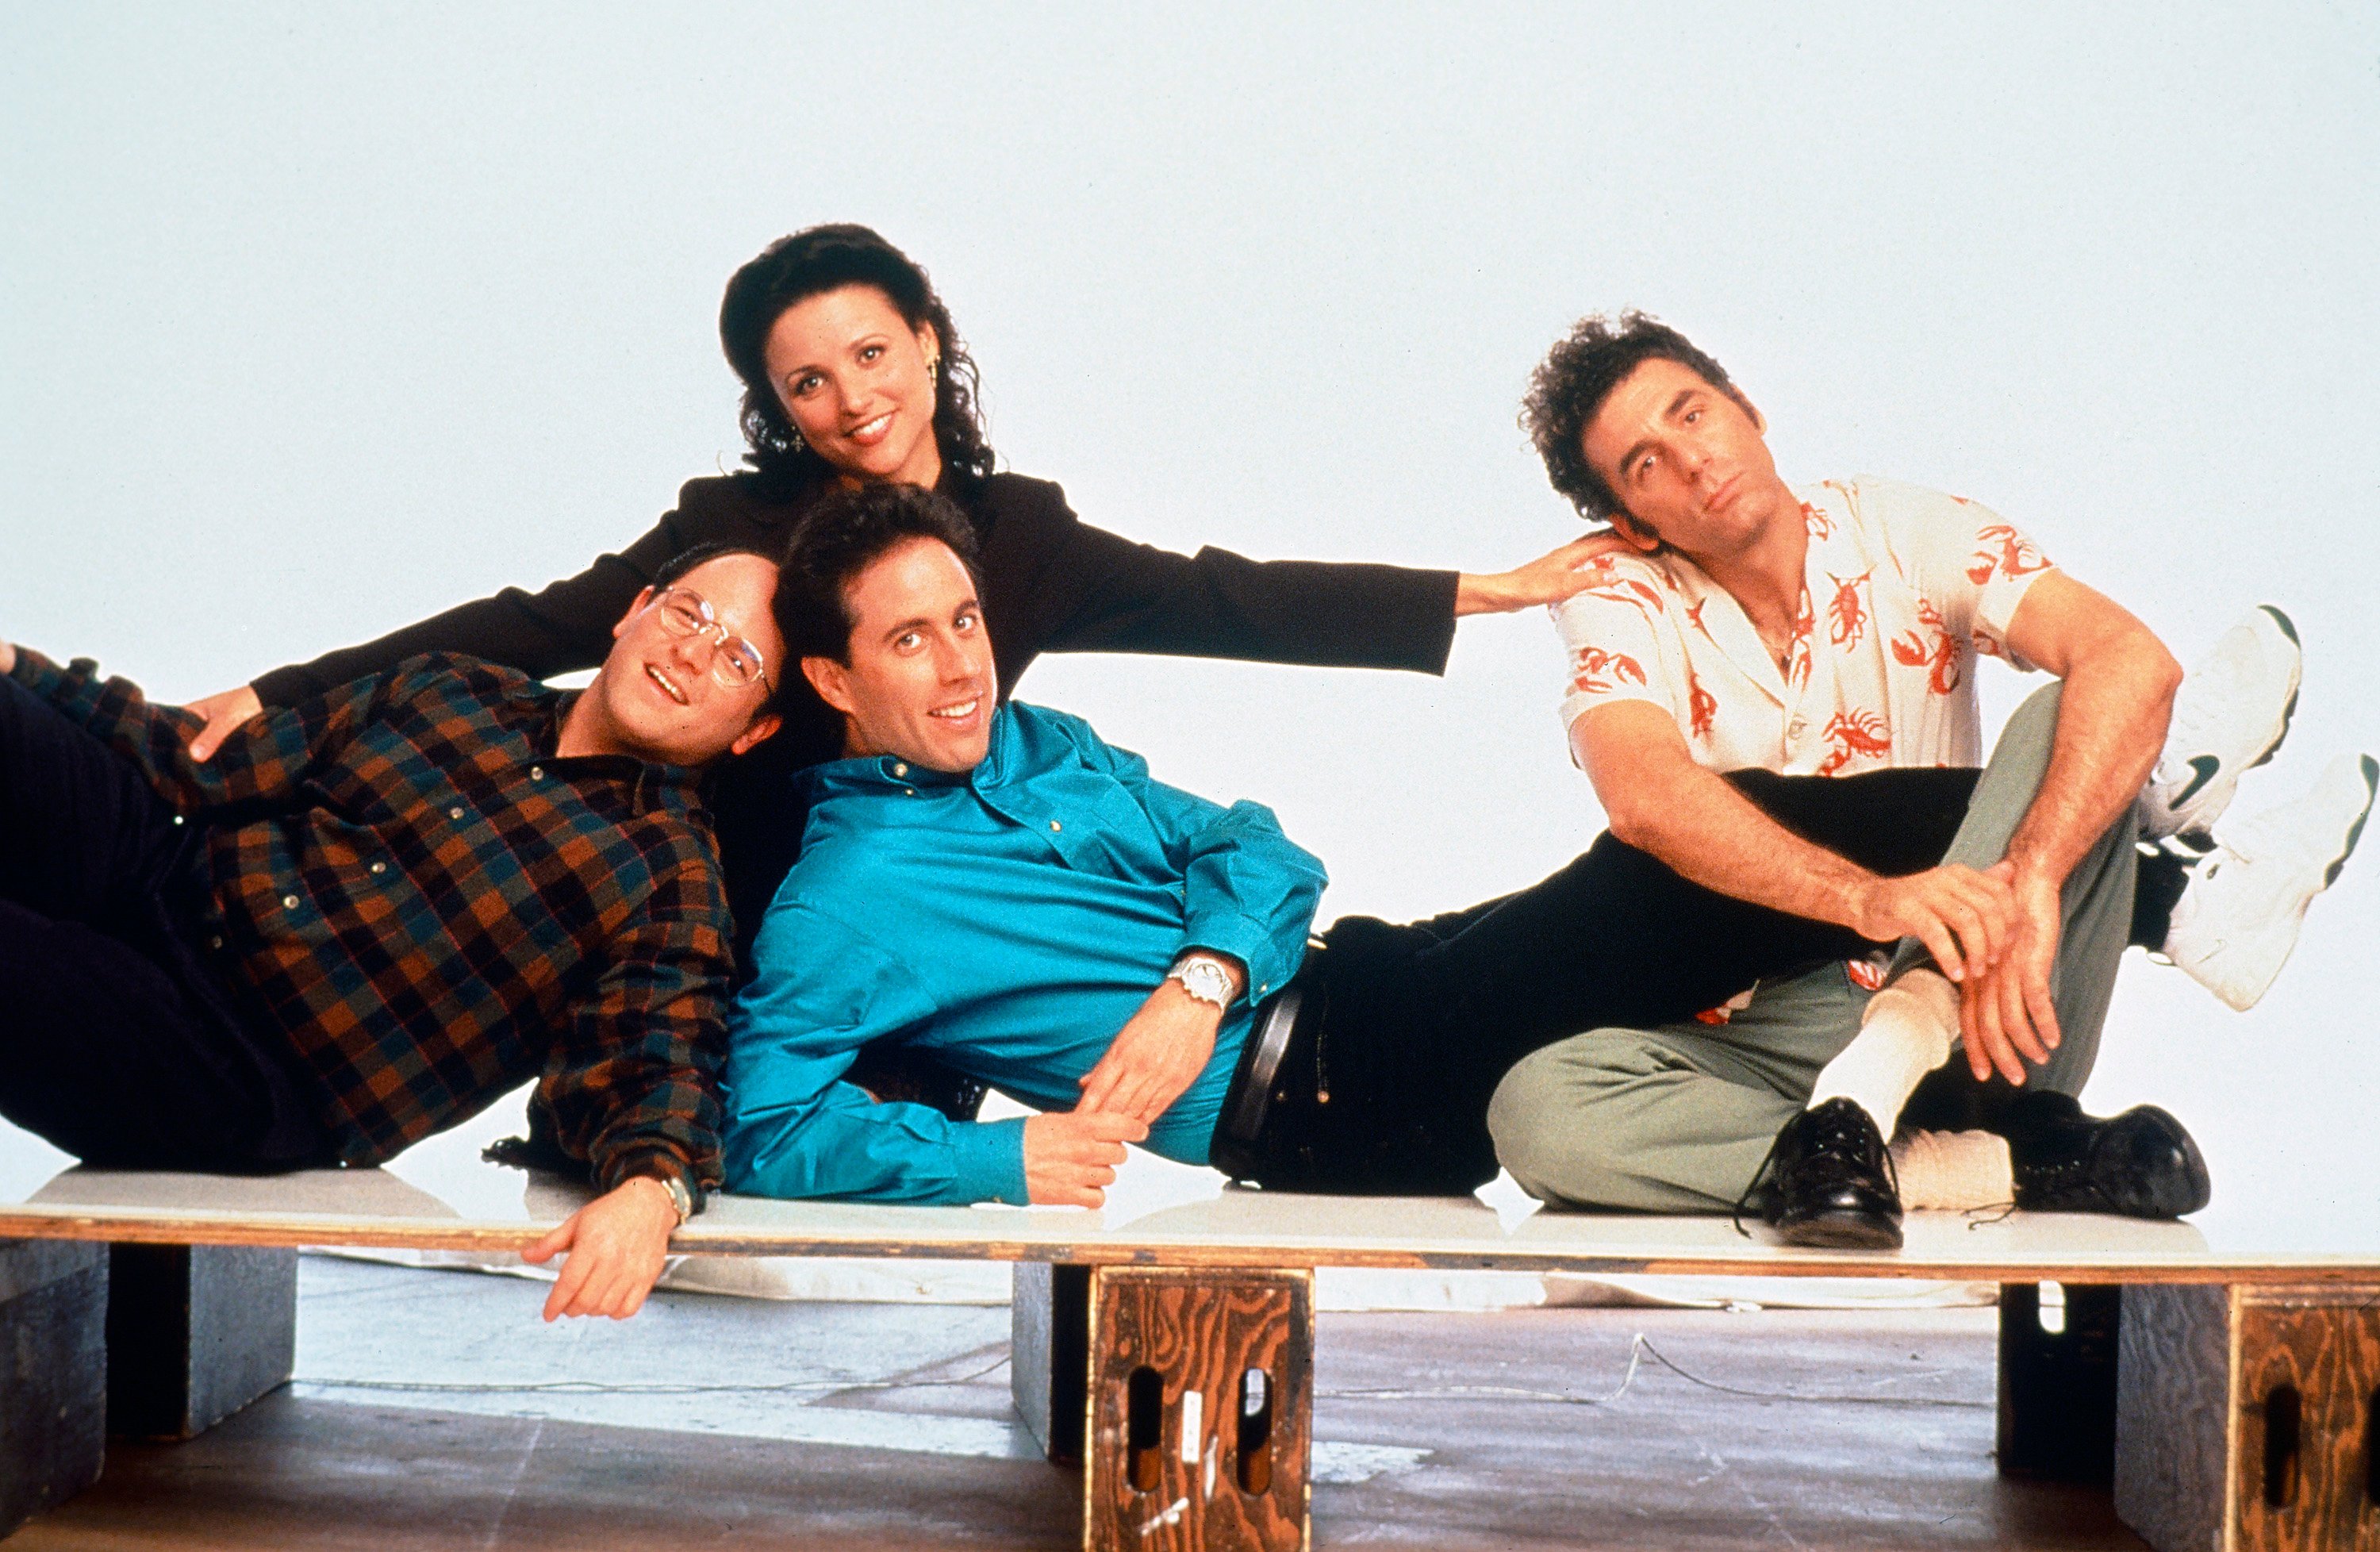 The cast of 'Seinfeld' pose for promotional photos ahead of the season 6 premiere. Season 6 contains one of the best 'Seinfeld' Christmas epsiodes produced.